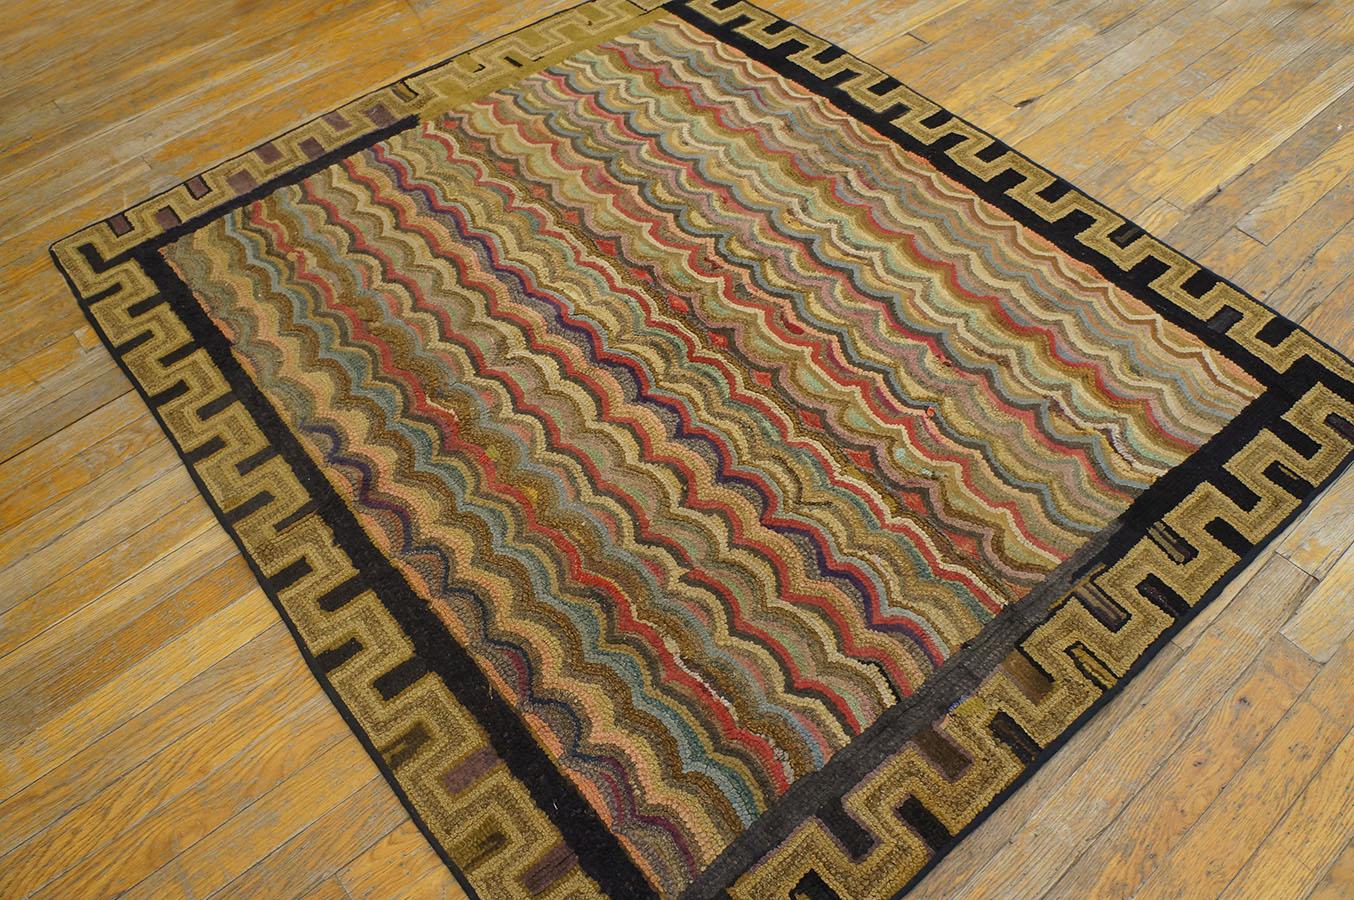 Antique American Hooked rug, Size: 4'2